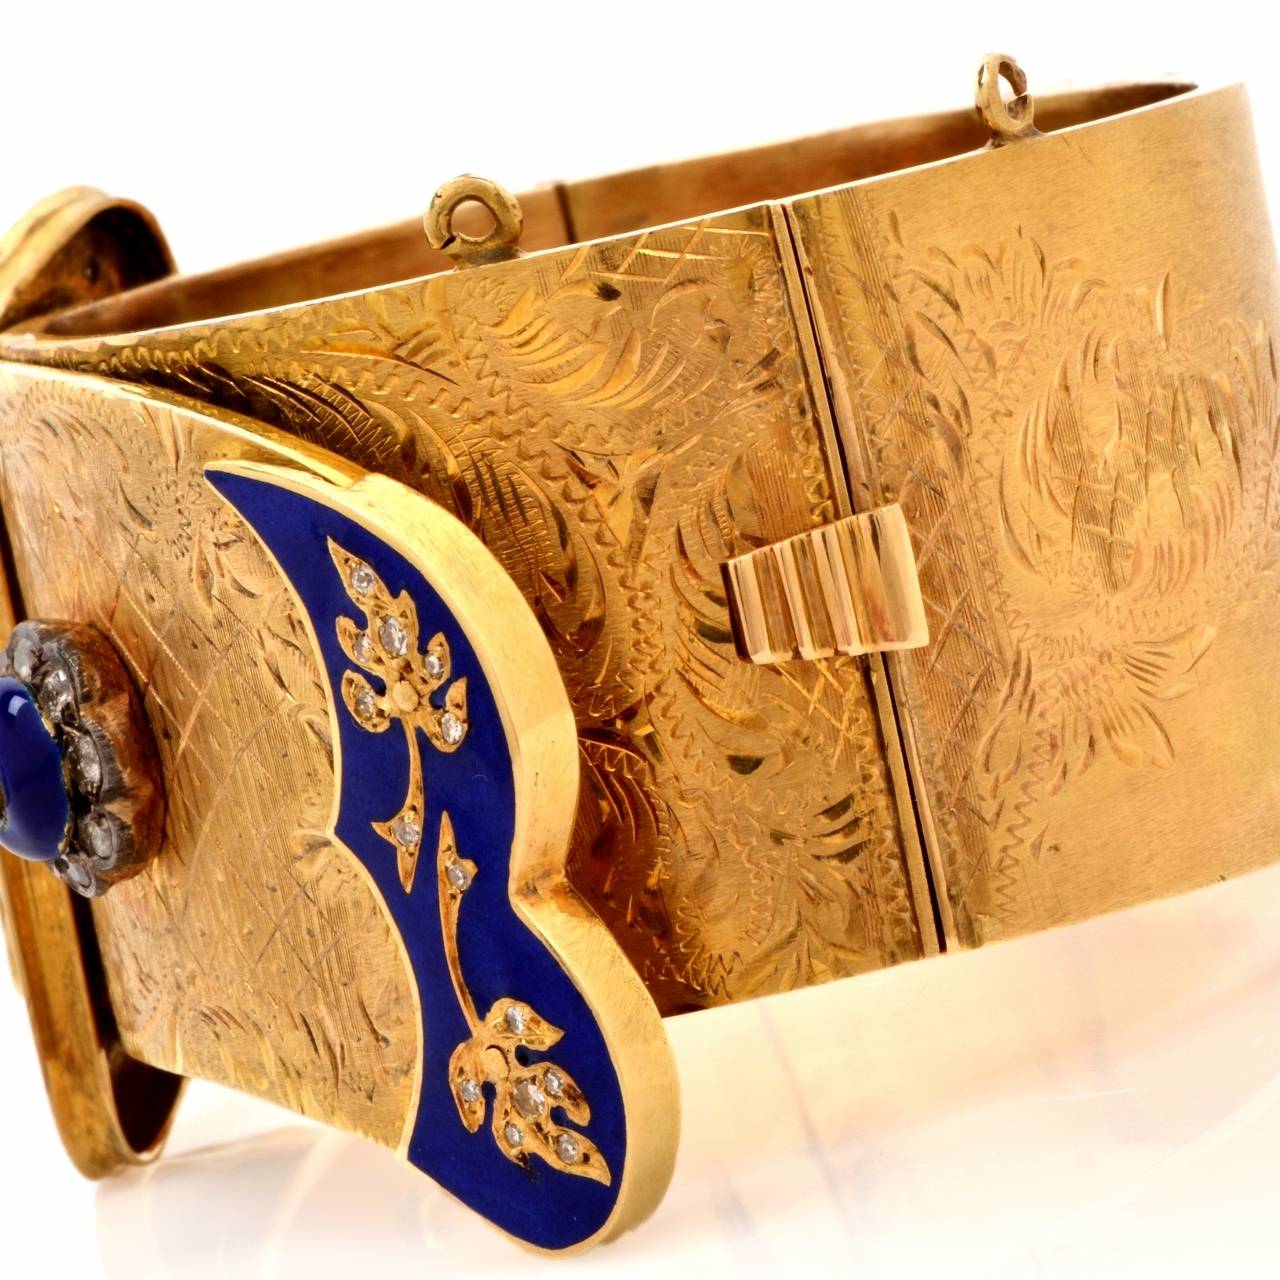 This captivating antique cuff bangle bracelet of immaculate craftsmanship and highly ornate aesthetic is crafted in solid 18K yellow gold, weighing 67.8 grams and measuring 6